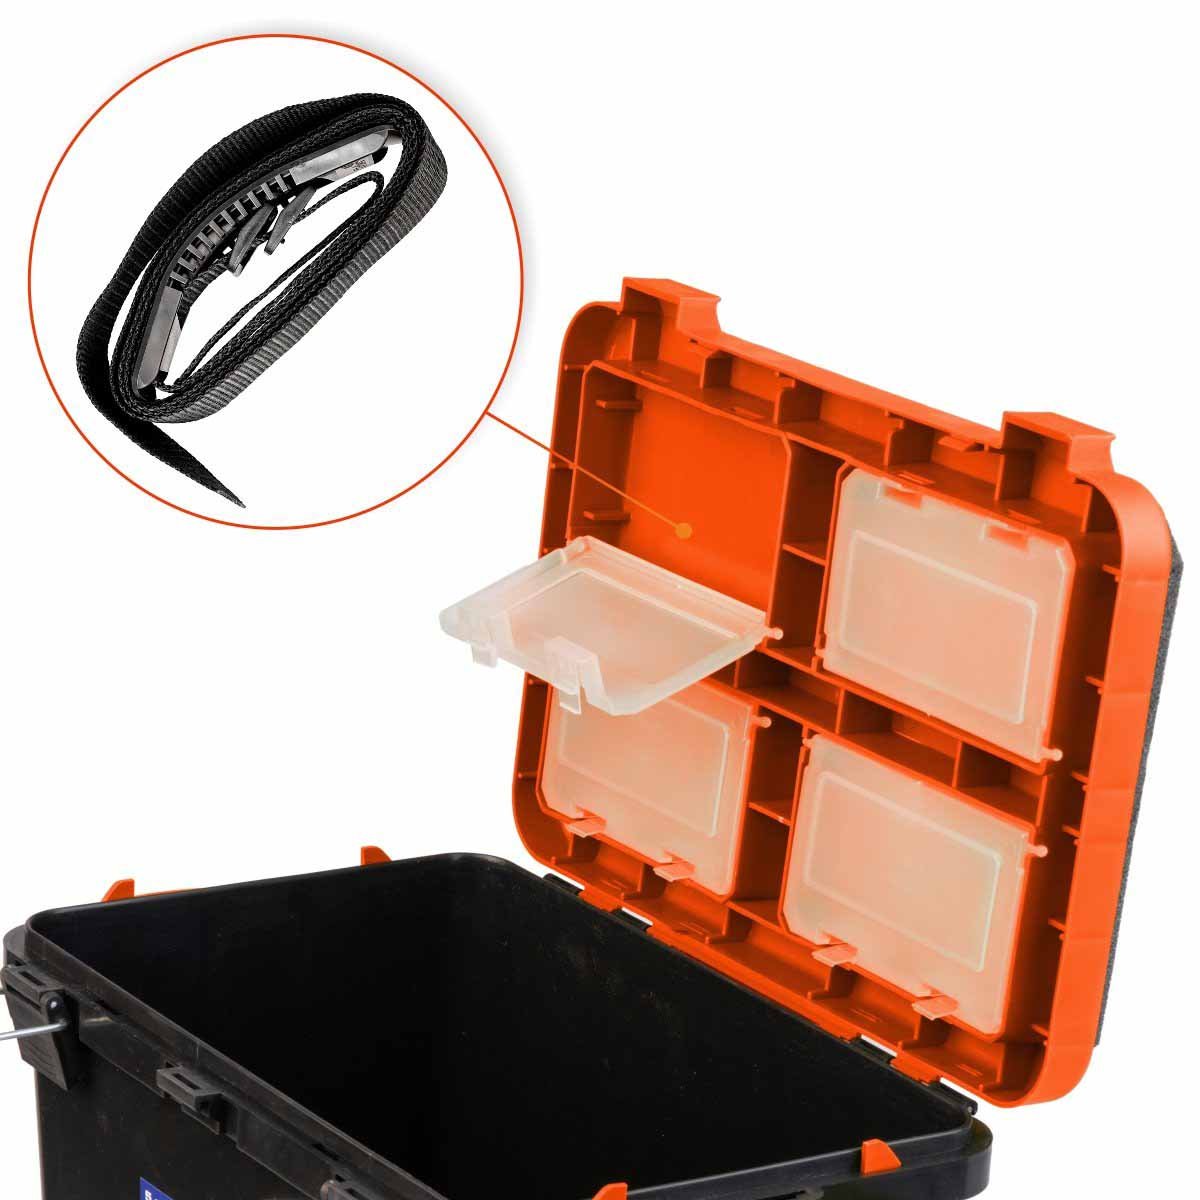 FishBox Large 5 gal Box for Ice Fishing is equipped with adjustable shoulder strap